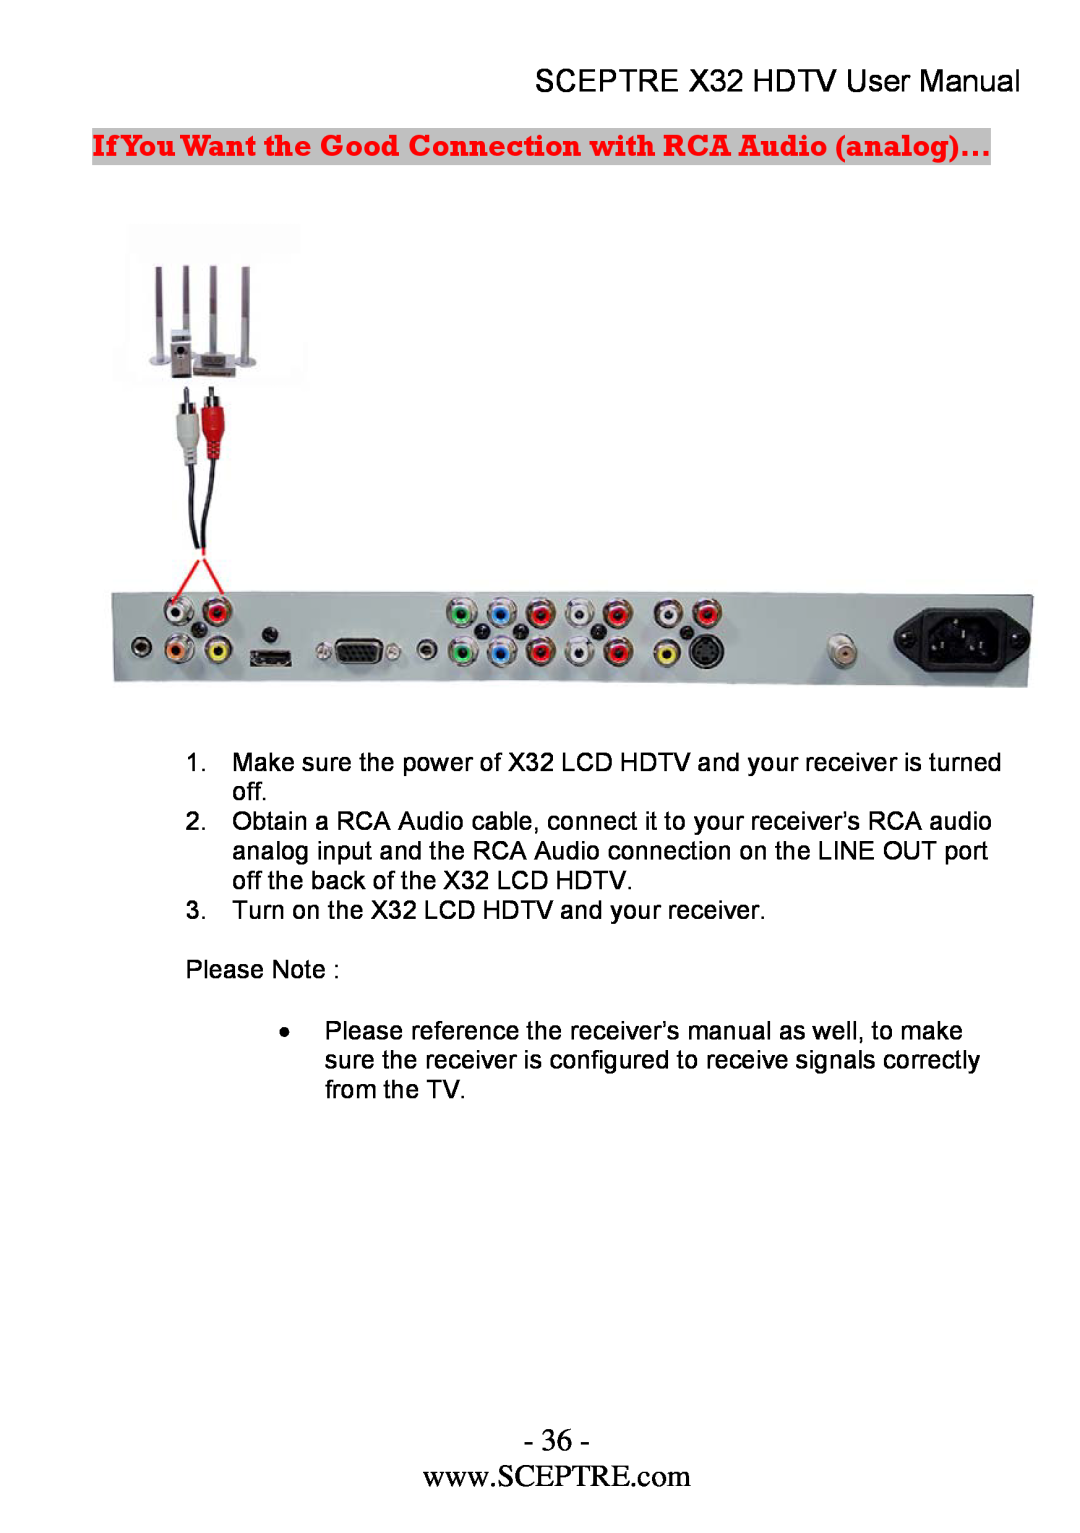 Sceptre Technologies x32 user manual If You Want the Good Connection with RCA Audio analog…, SCEPTRE X32 HDTV User Manual 